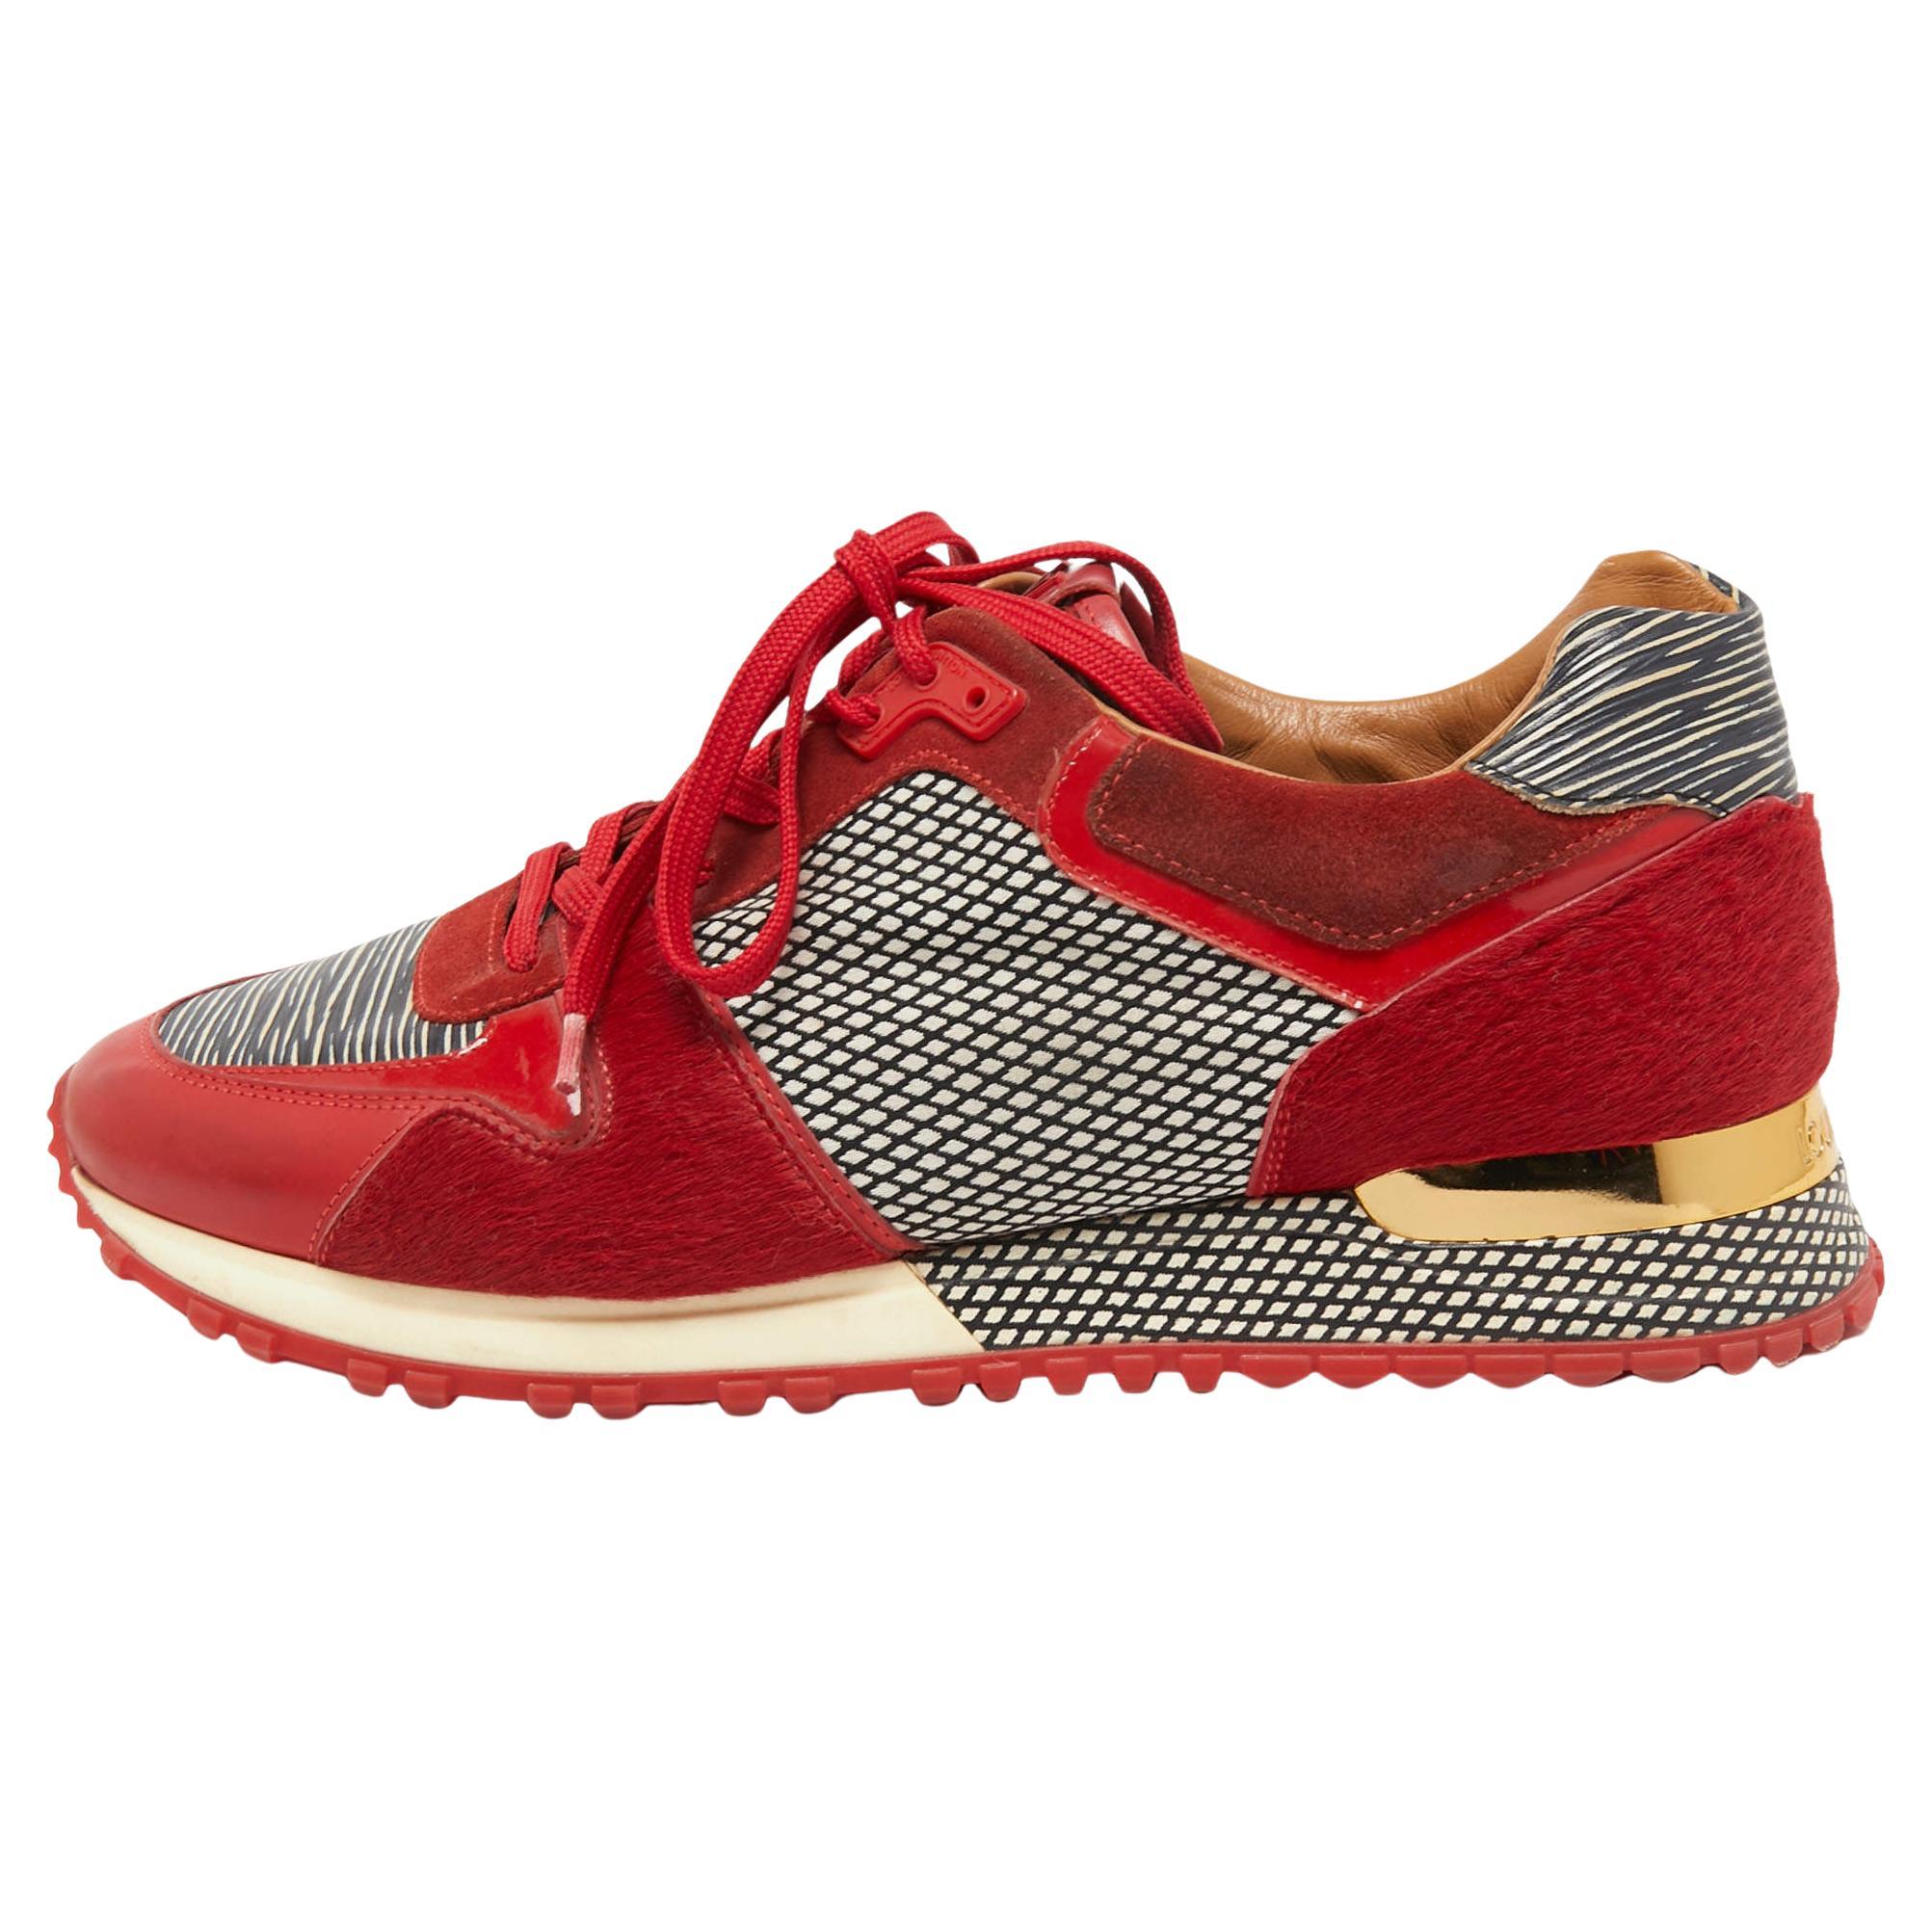 Louis Vuitton Red Calf Hair, Fabric and Epi Leather Run Away Sneakers Size 38.5